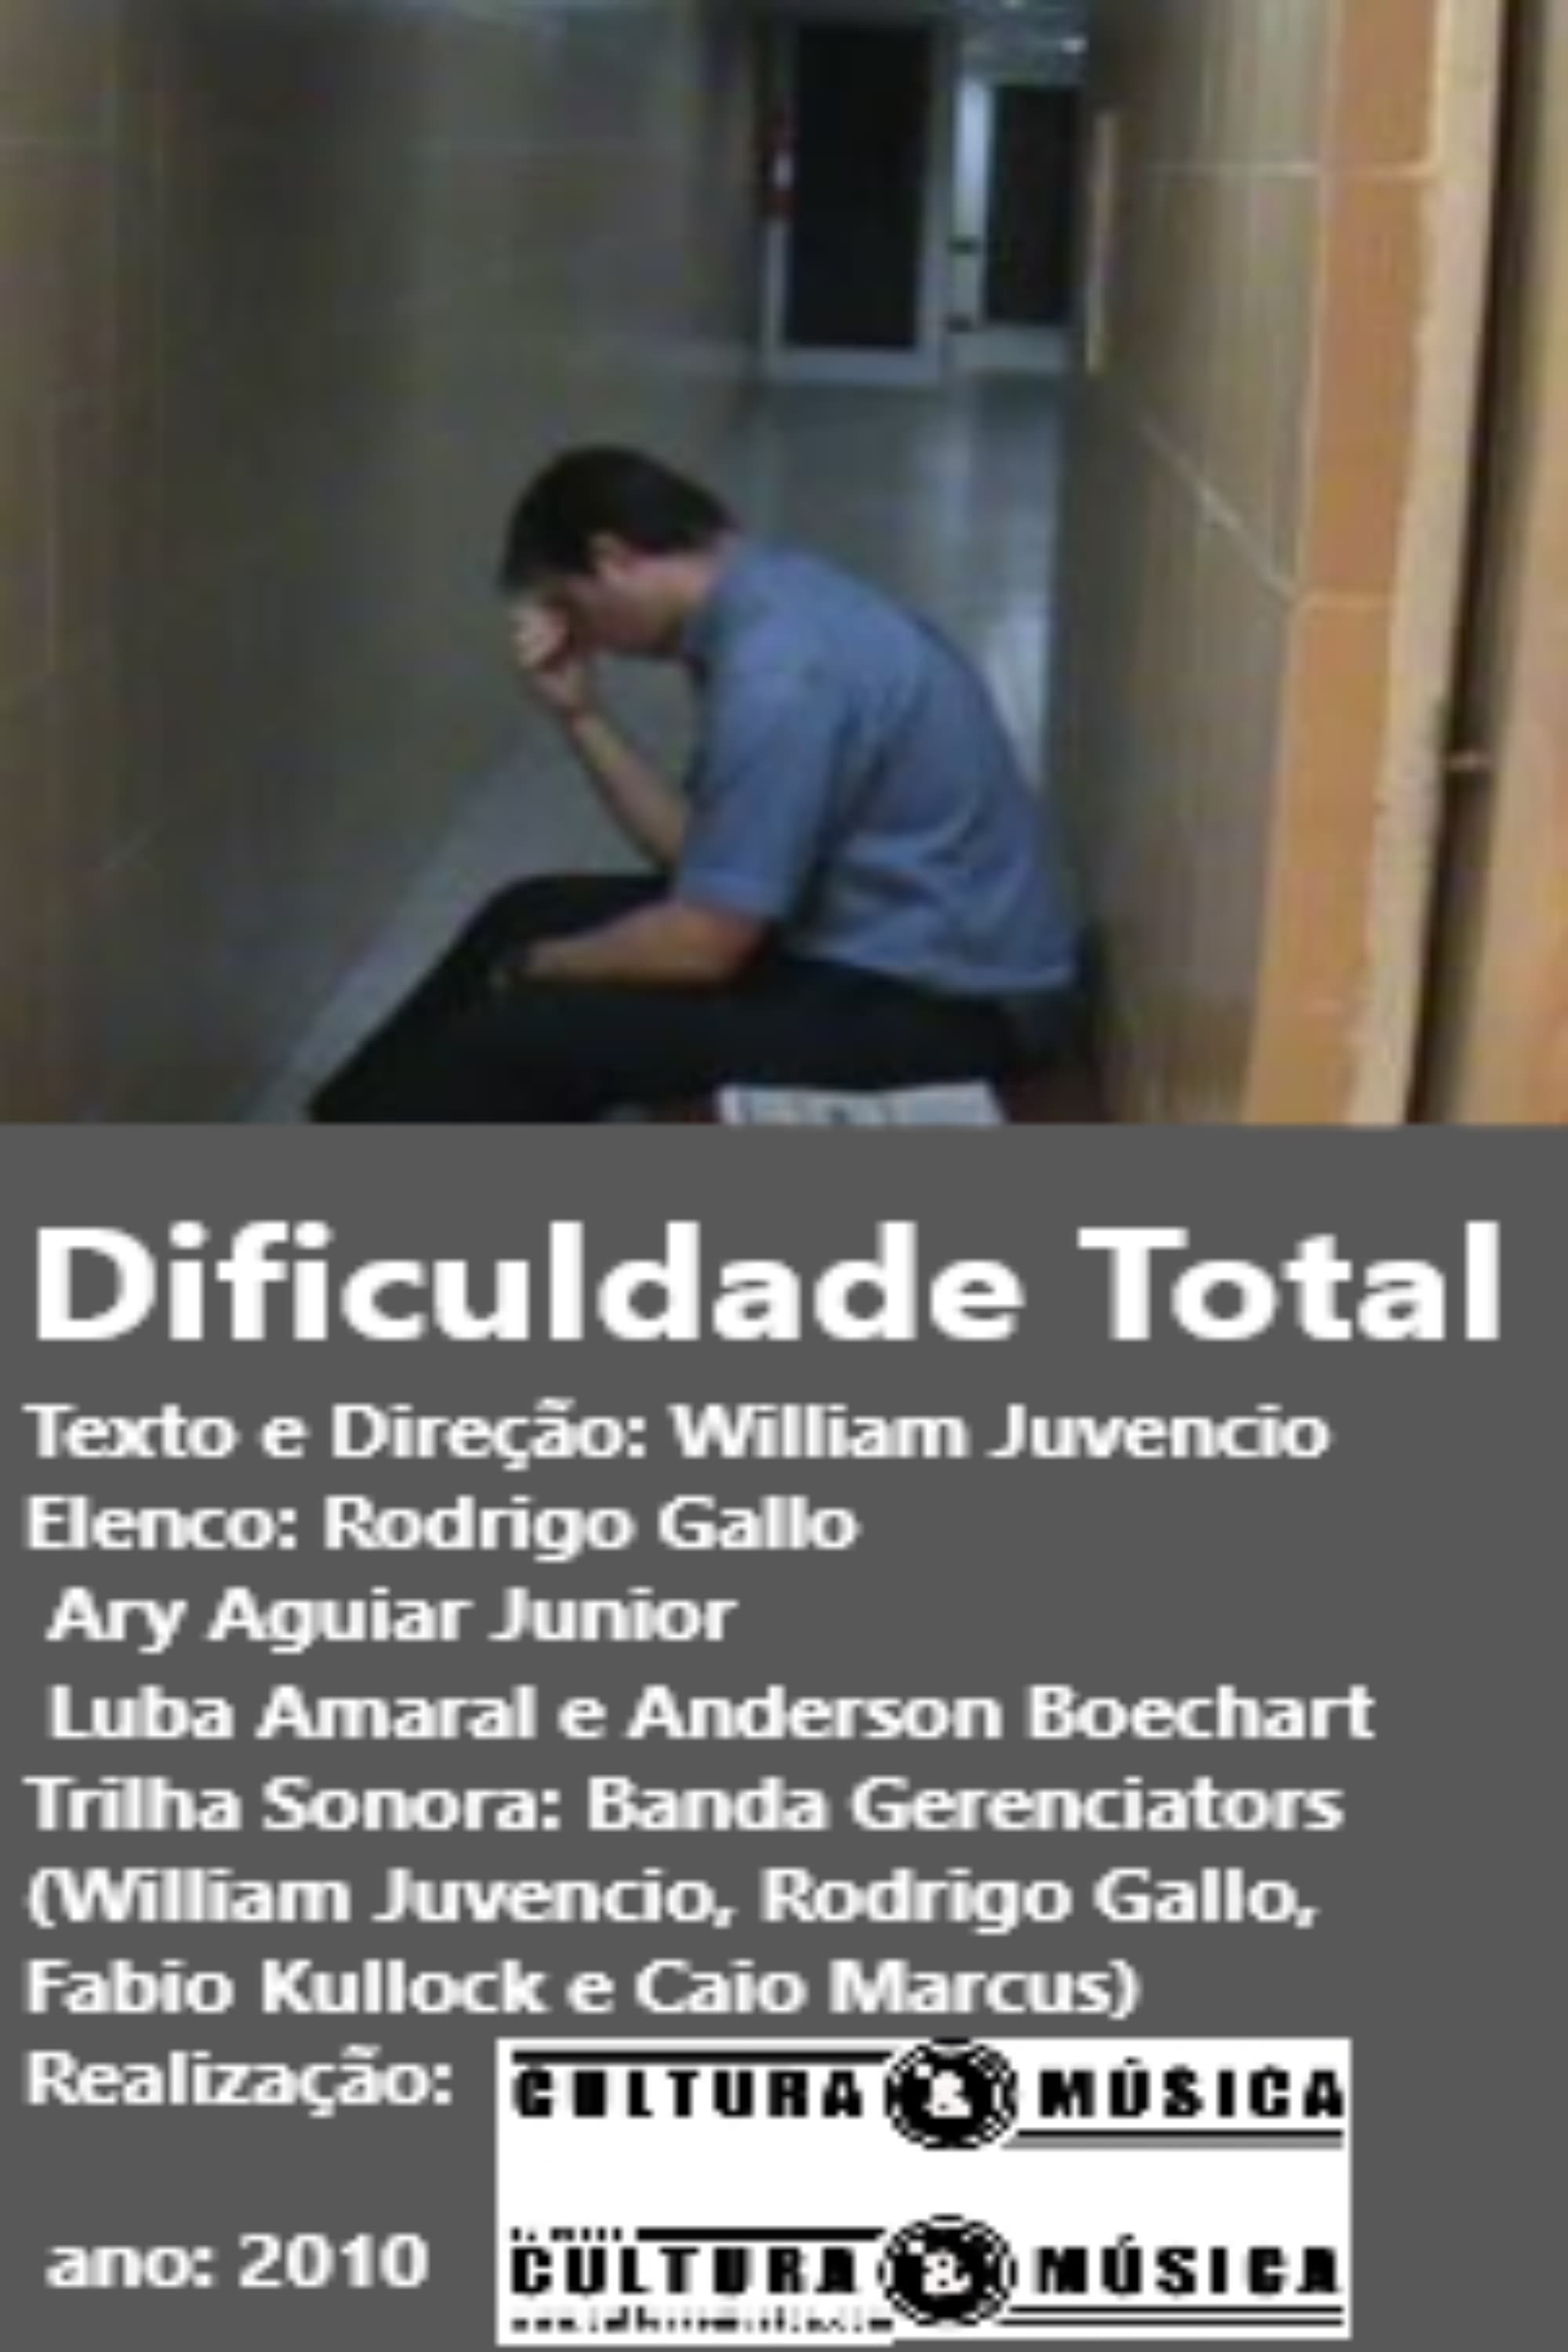 Dificuldade Total